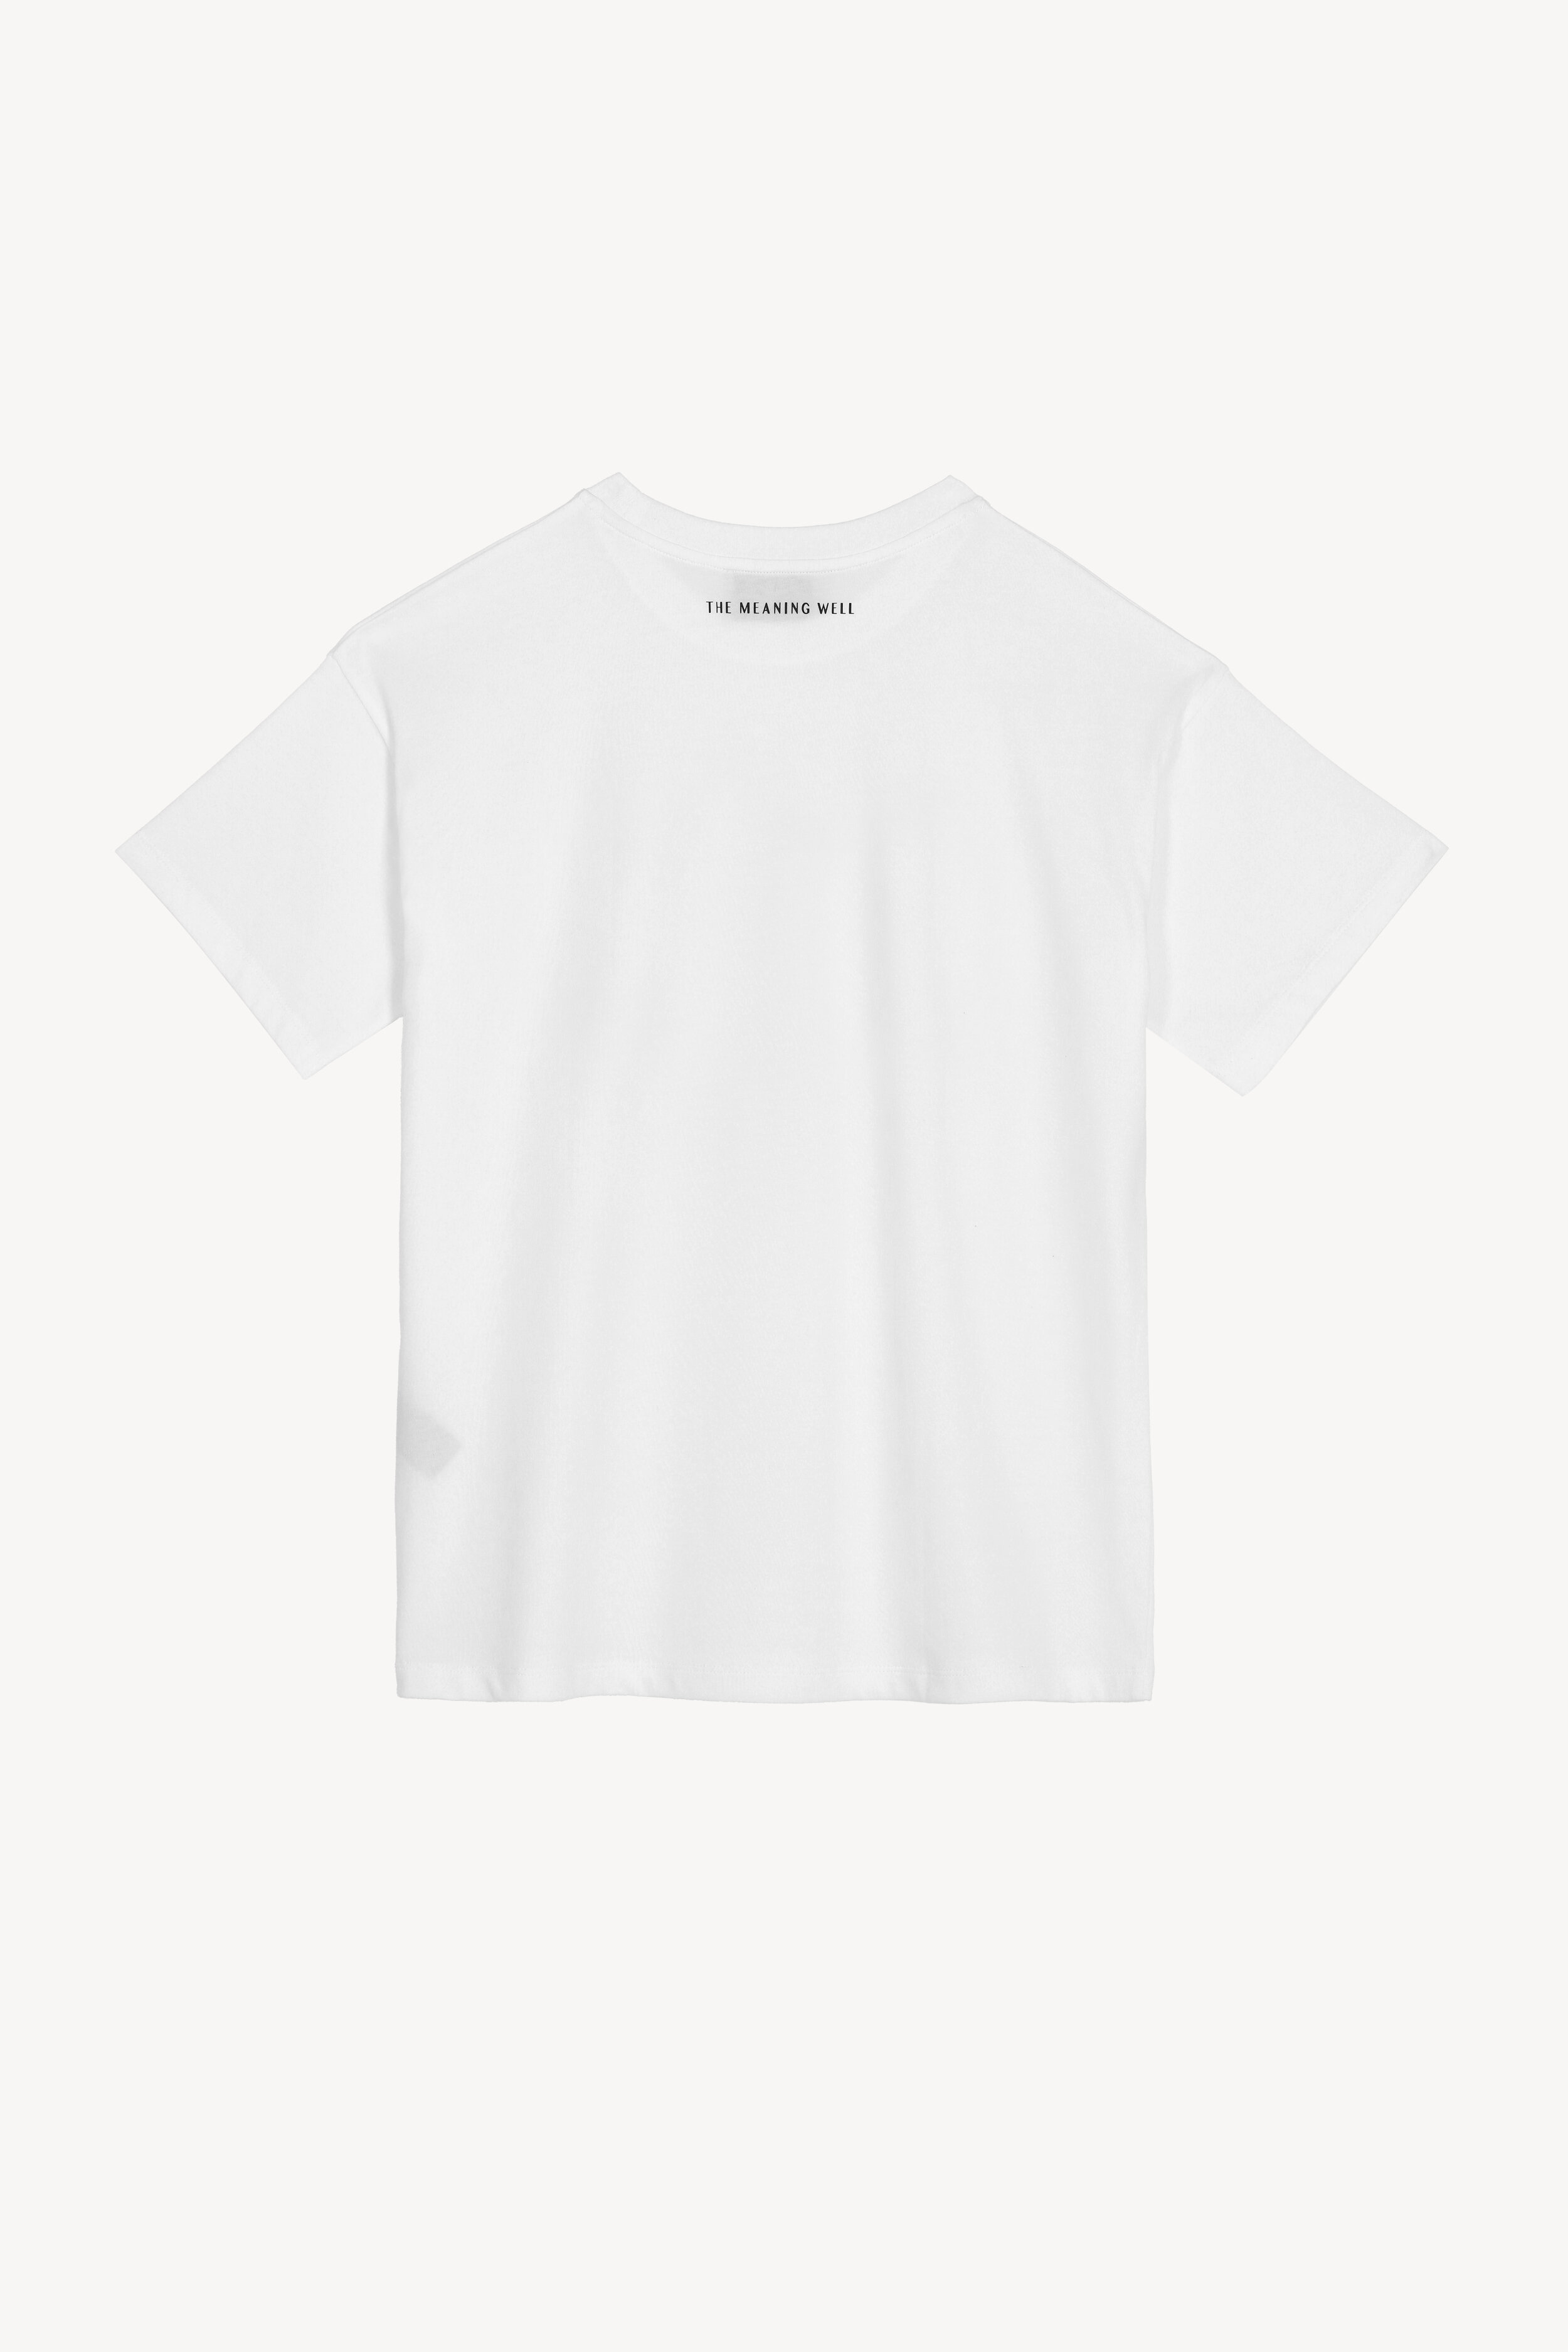 Hope You Are Well White Short Sleeves T-Shirt — The Meaning Well